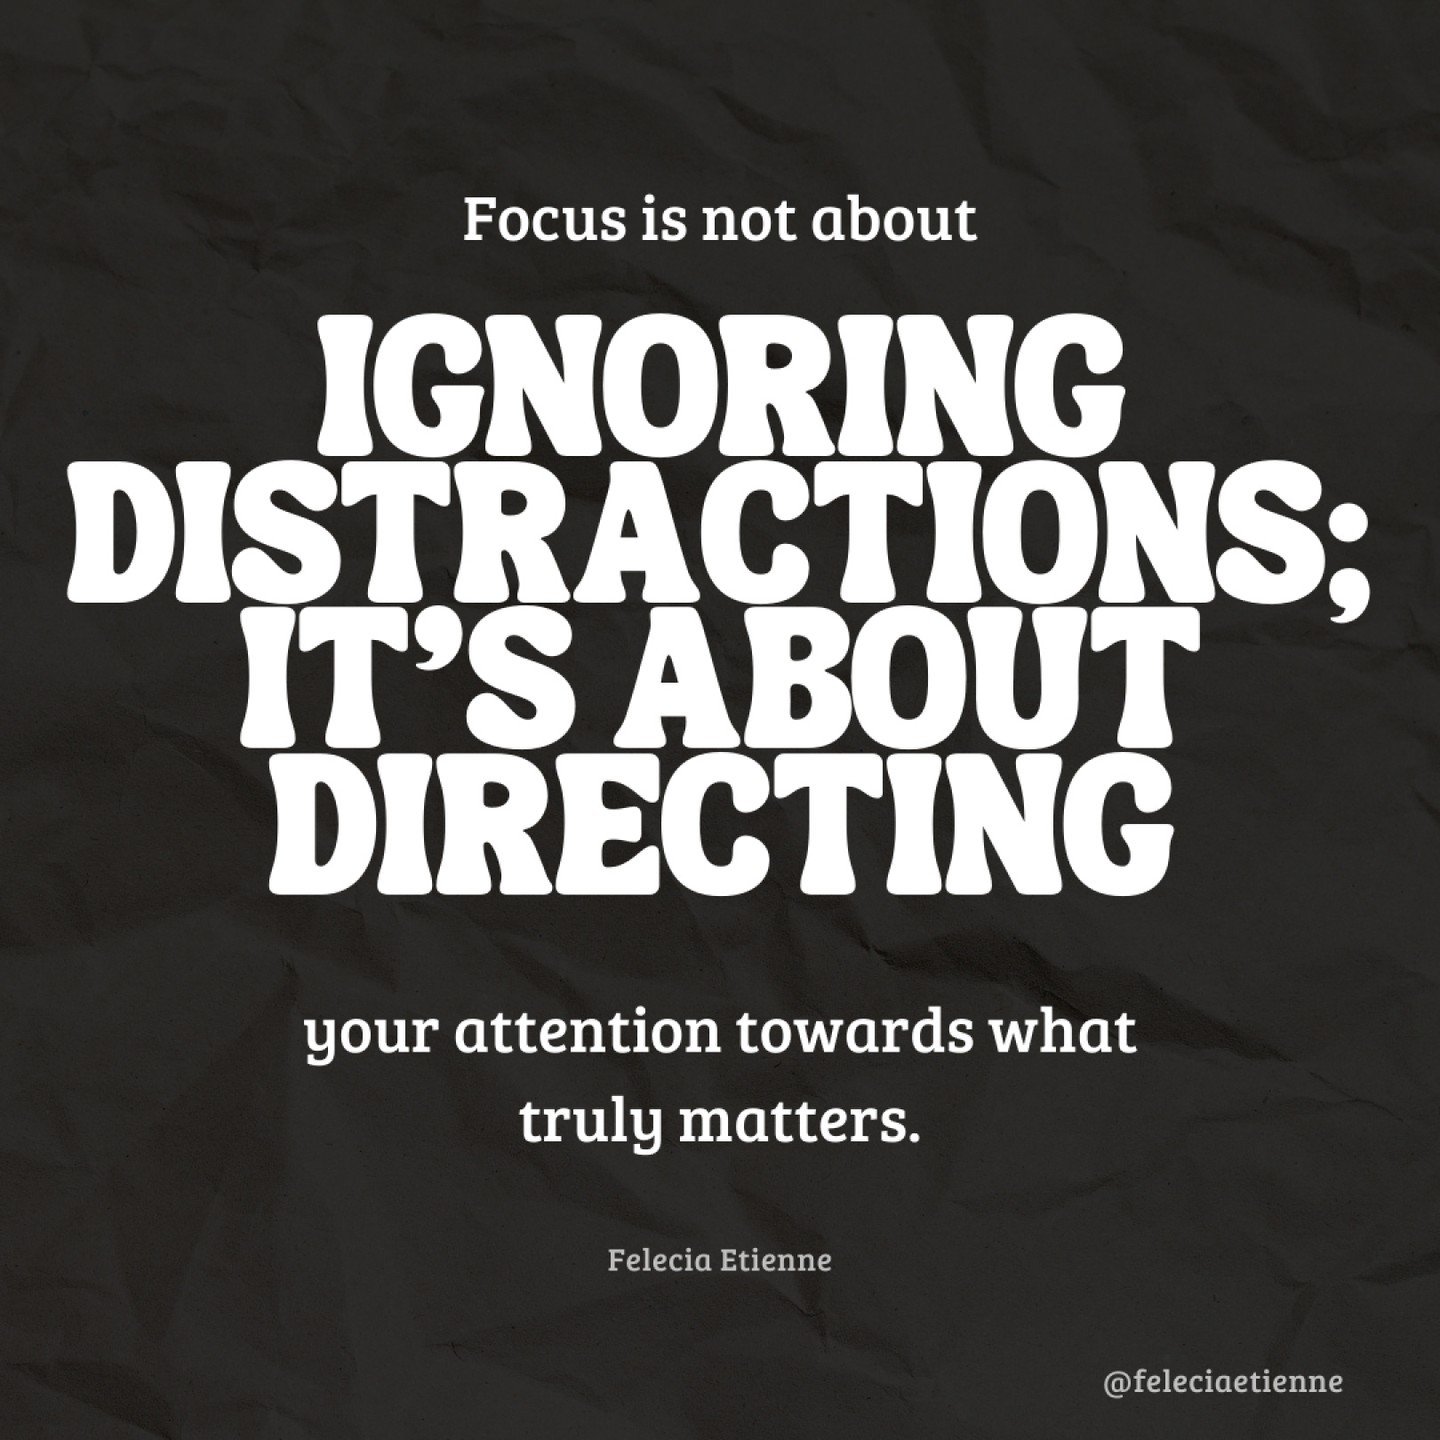 👉 Ever feel like you're pulled in a million directions, unable to focus on what's important? It's a common struggle, but allowing distractions to steal your attention can derail your progress and leave you feeling overwhelmed.

🛑 Trying to multitas